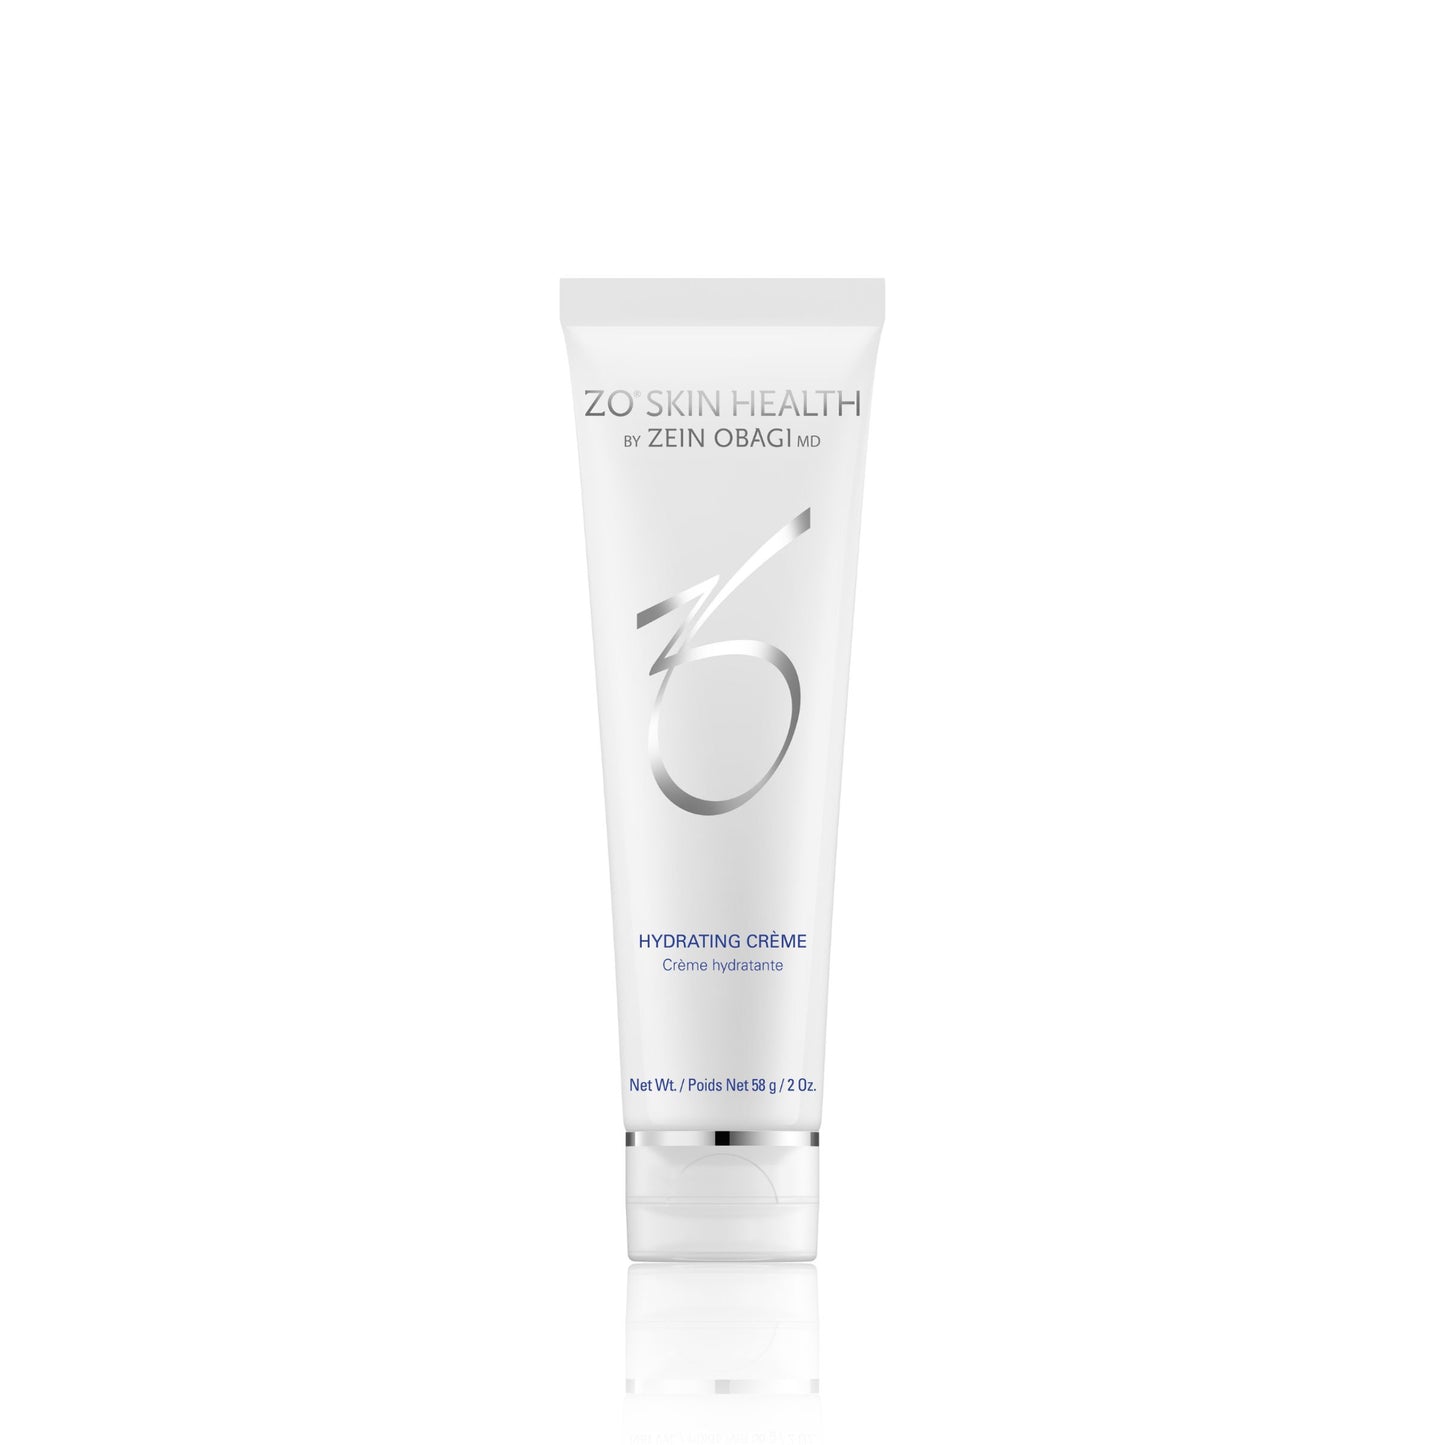 ZO Skin Health Hydrating Crème in Travel Size